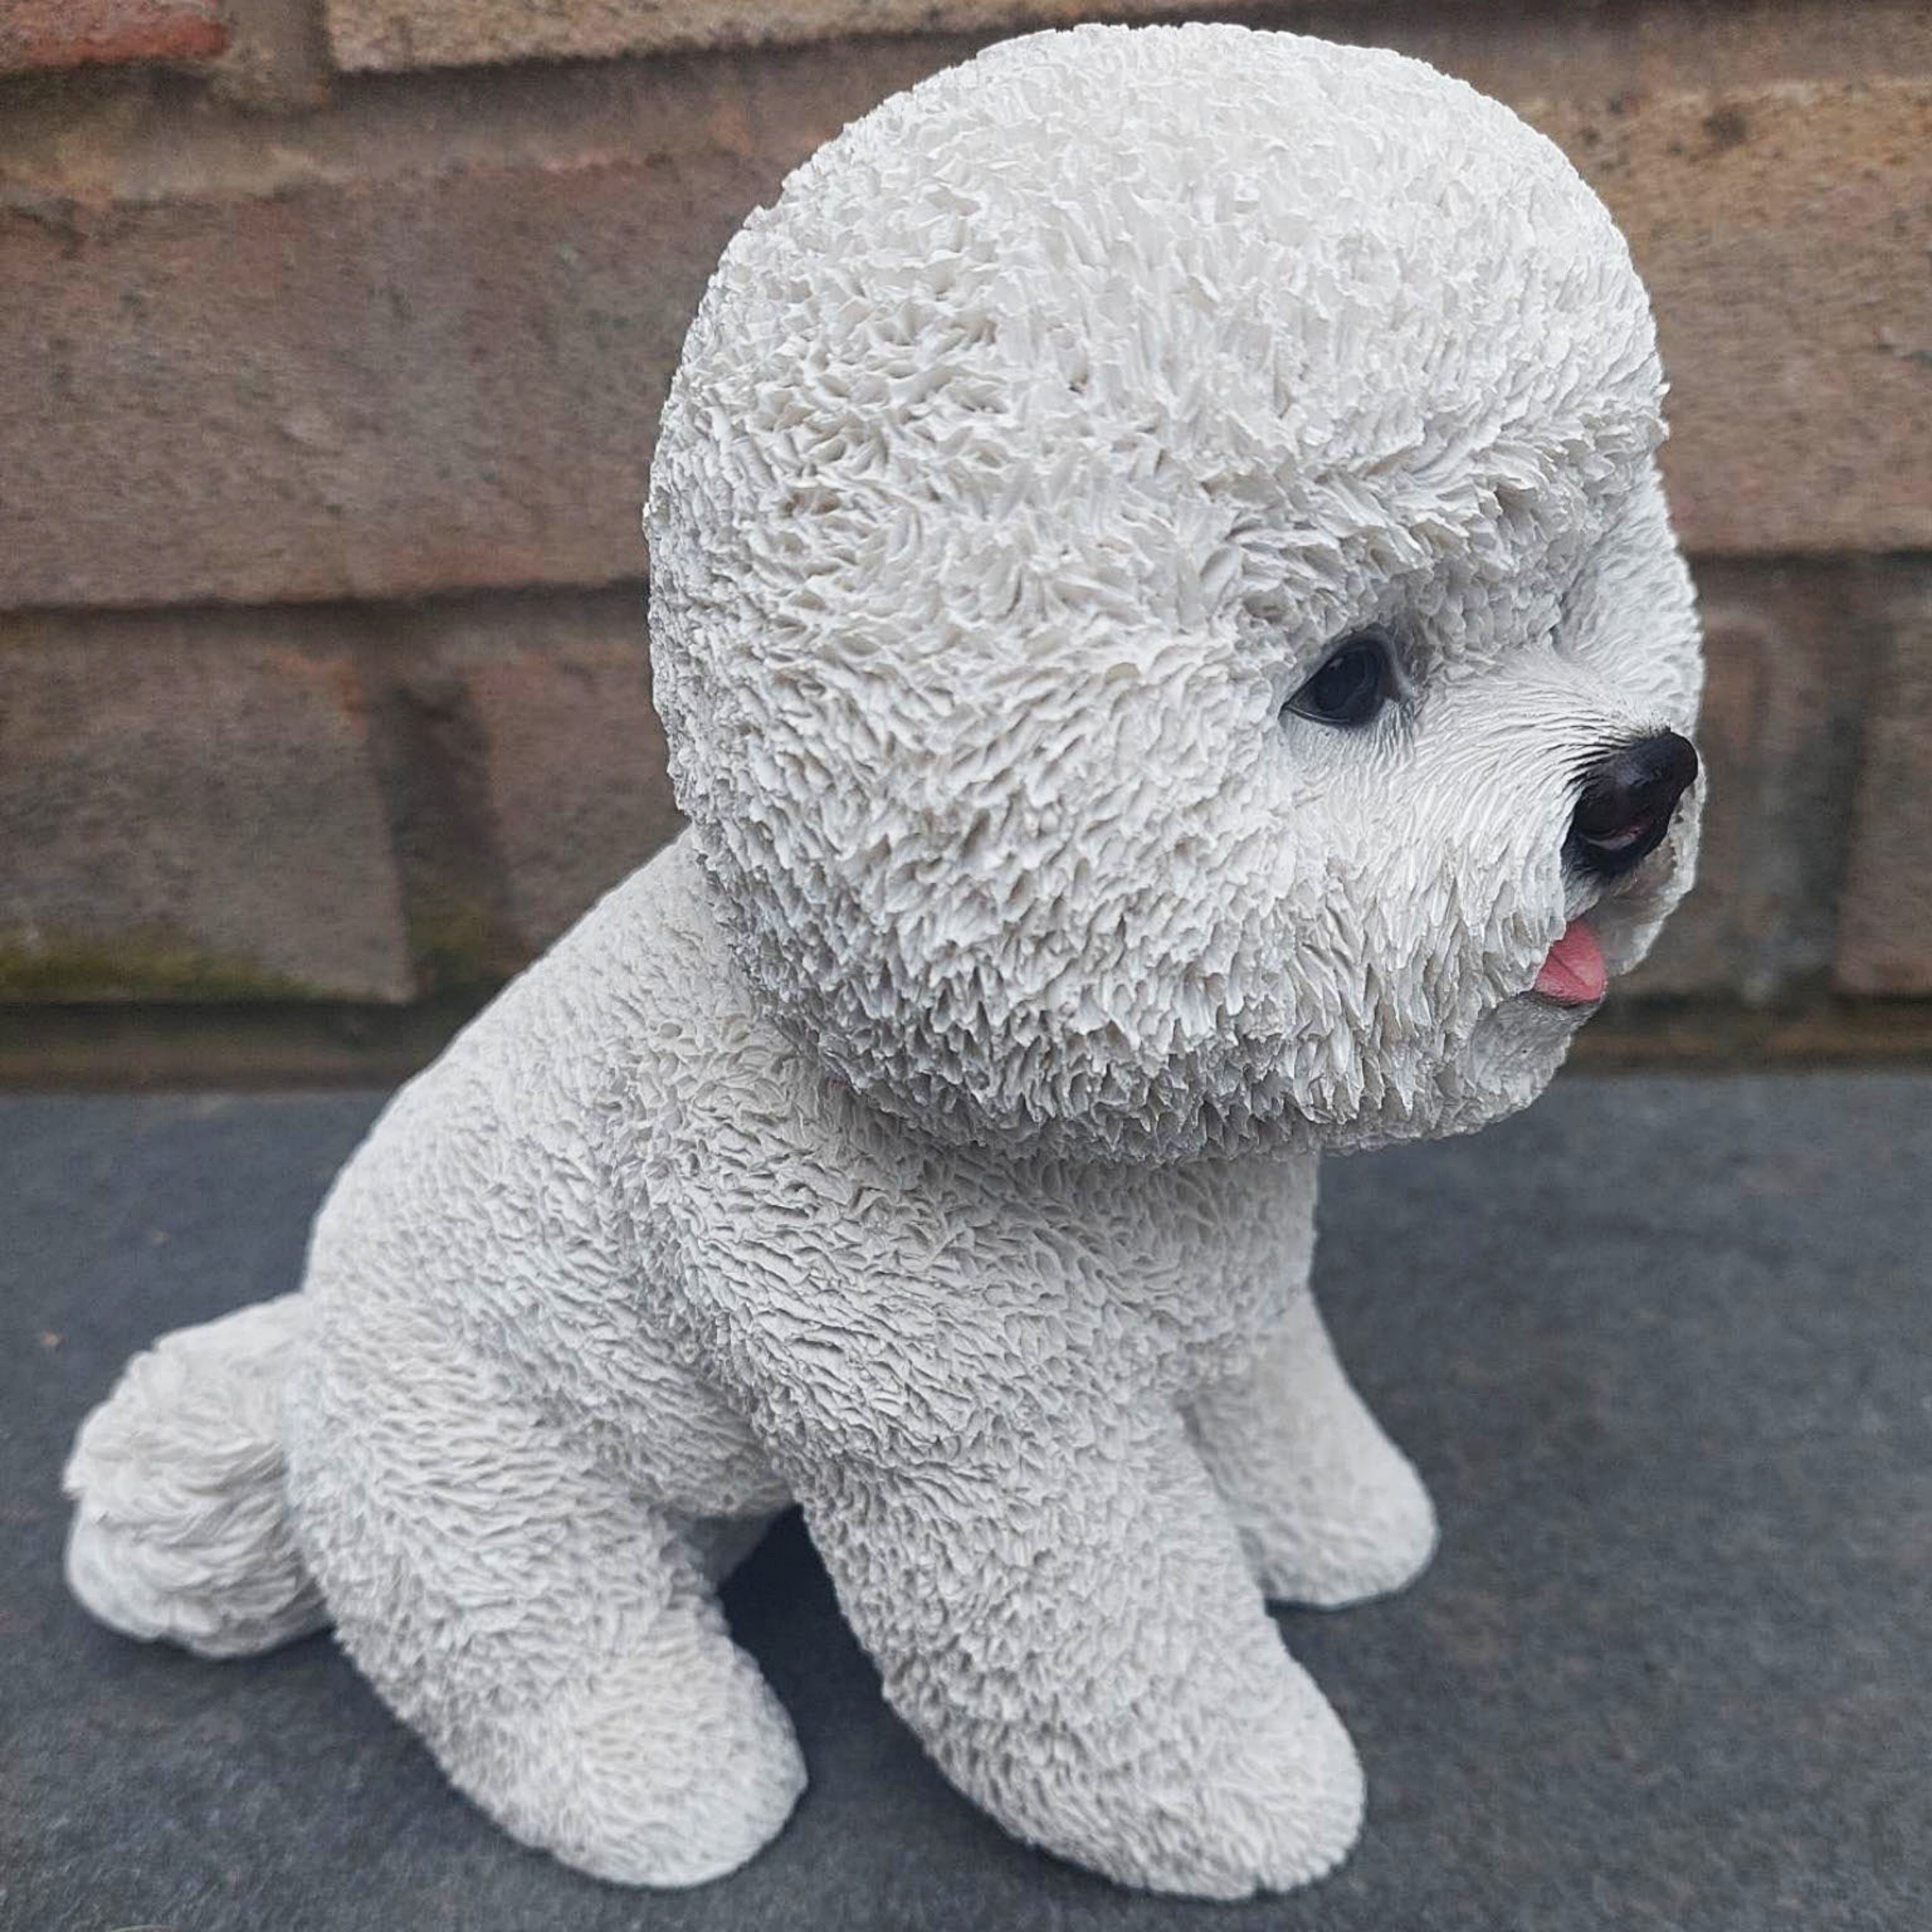 Well Groomed Sitting Bichon Frise Garden or Home Ornament